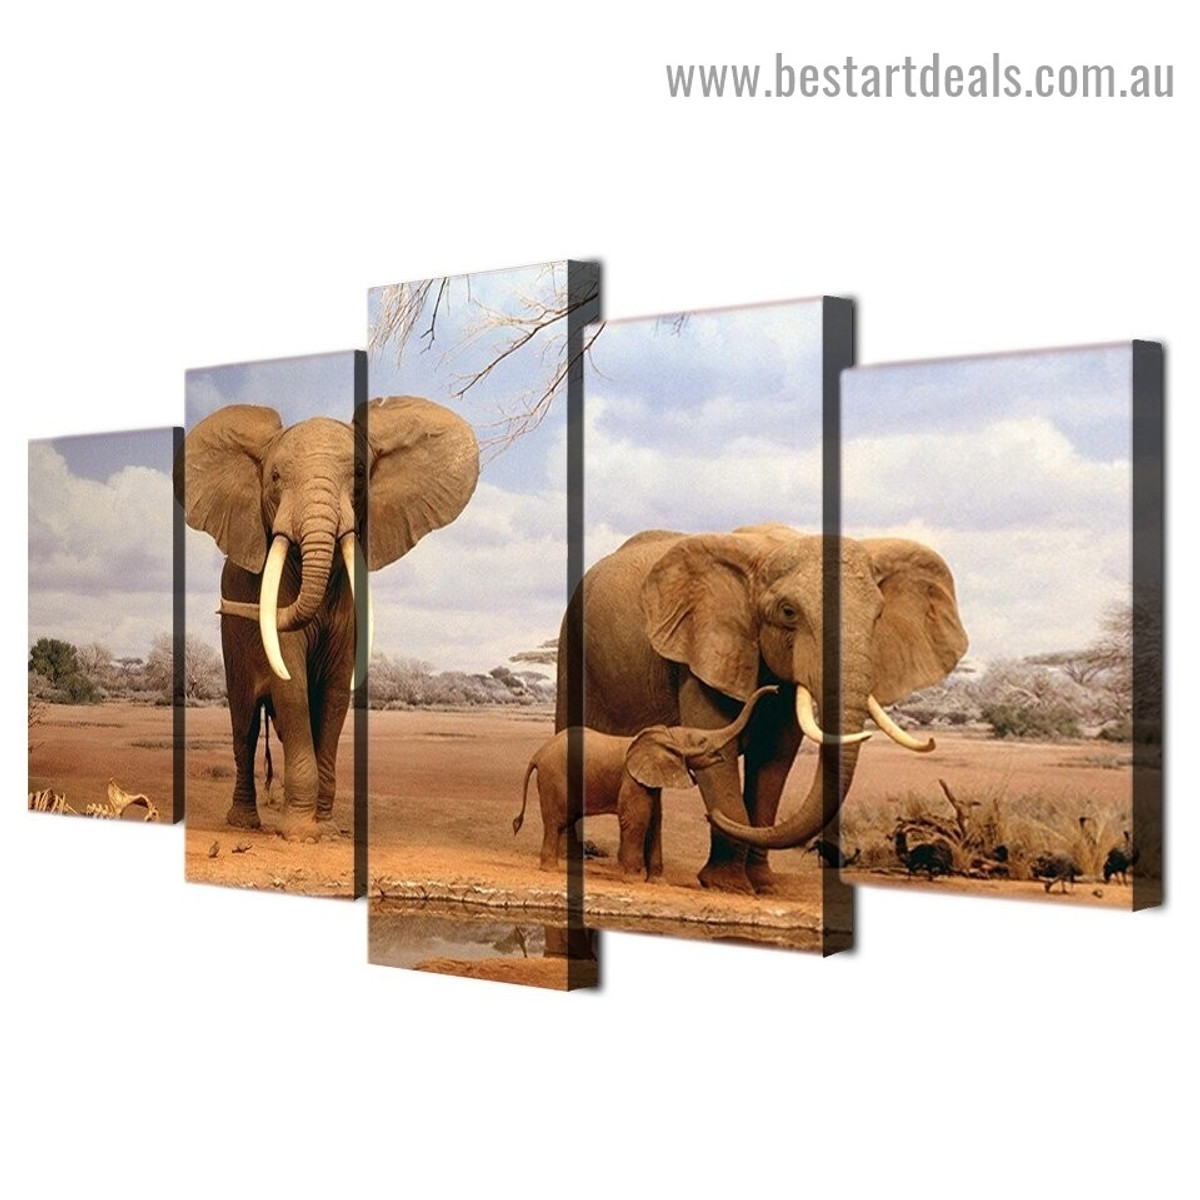 Elephant Family Animal Landscape Modern Artwork Photo Canvas Print for Room Wall Adornment